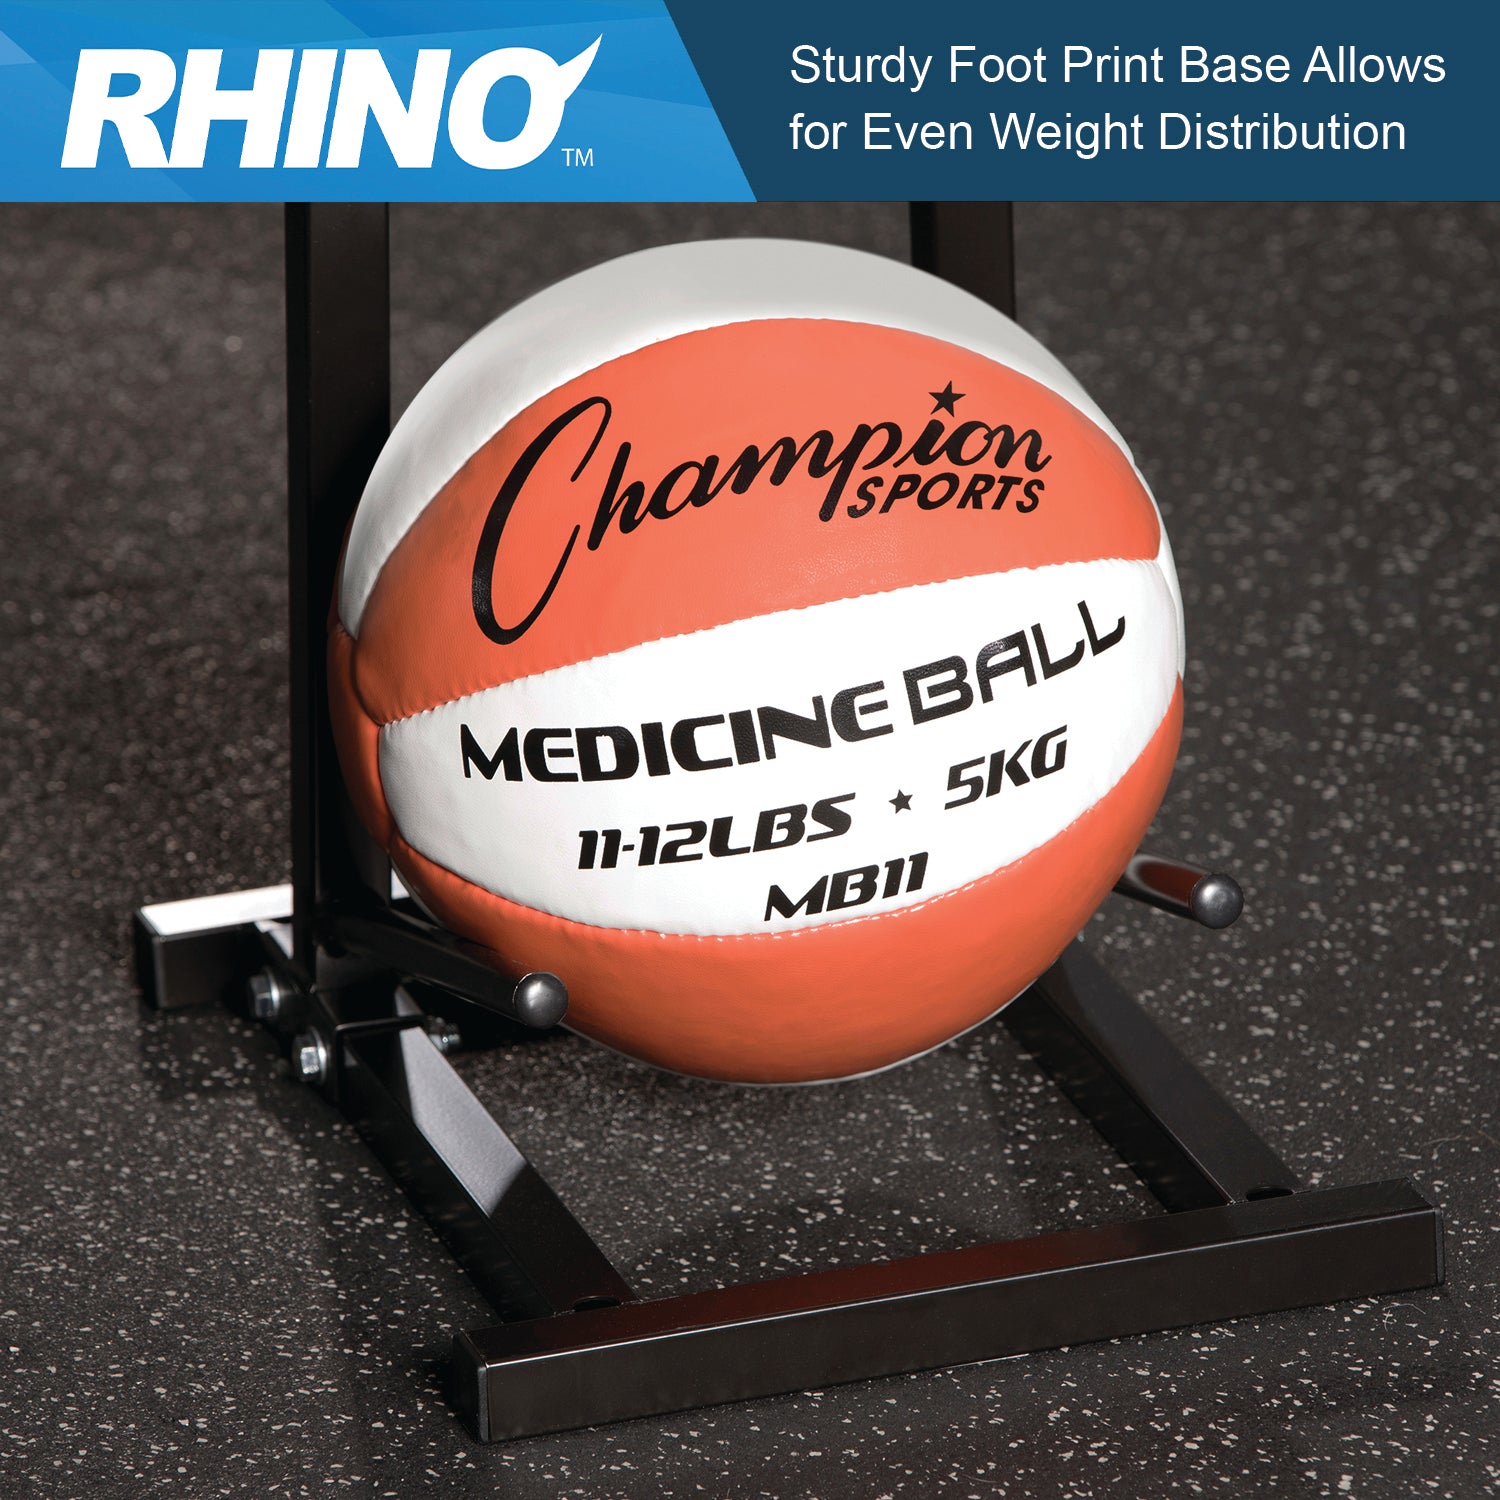 Single Medicine Ball Tree RHINO __label:NEW! accessories Agility fitness medicine ball physical therapy resistance Storage Training